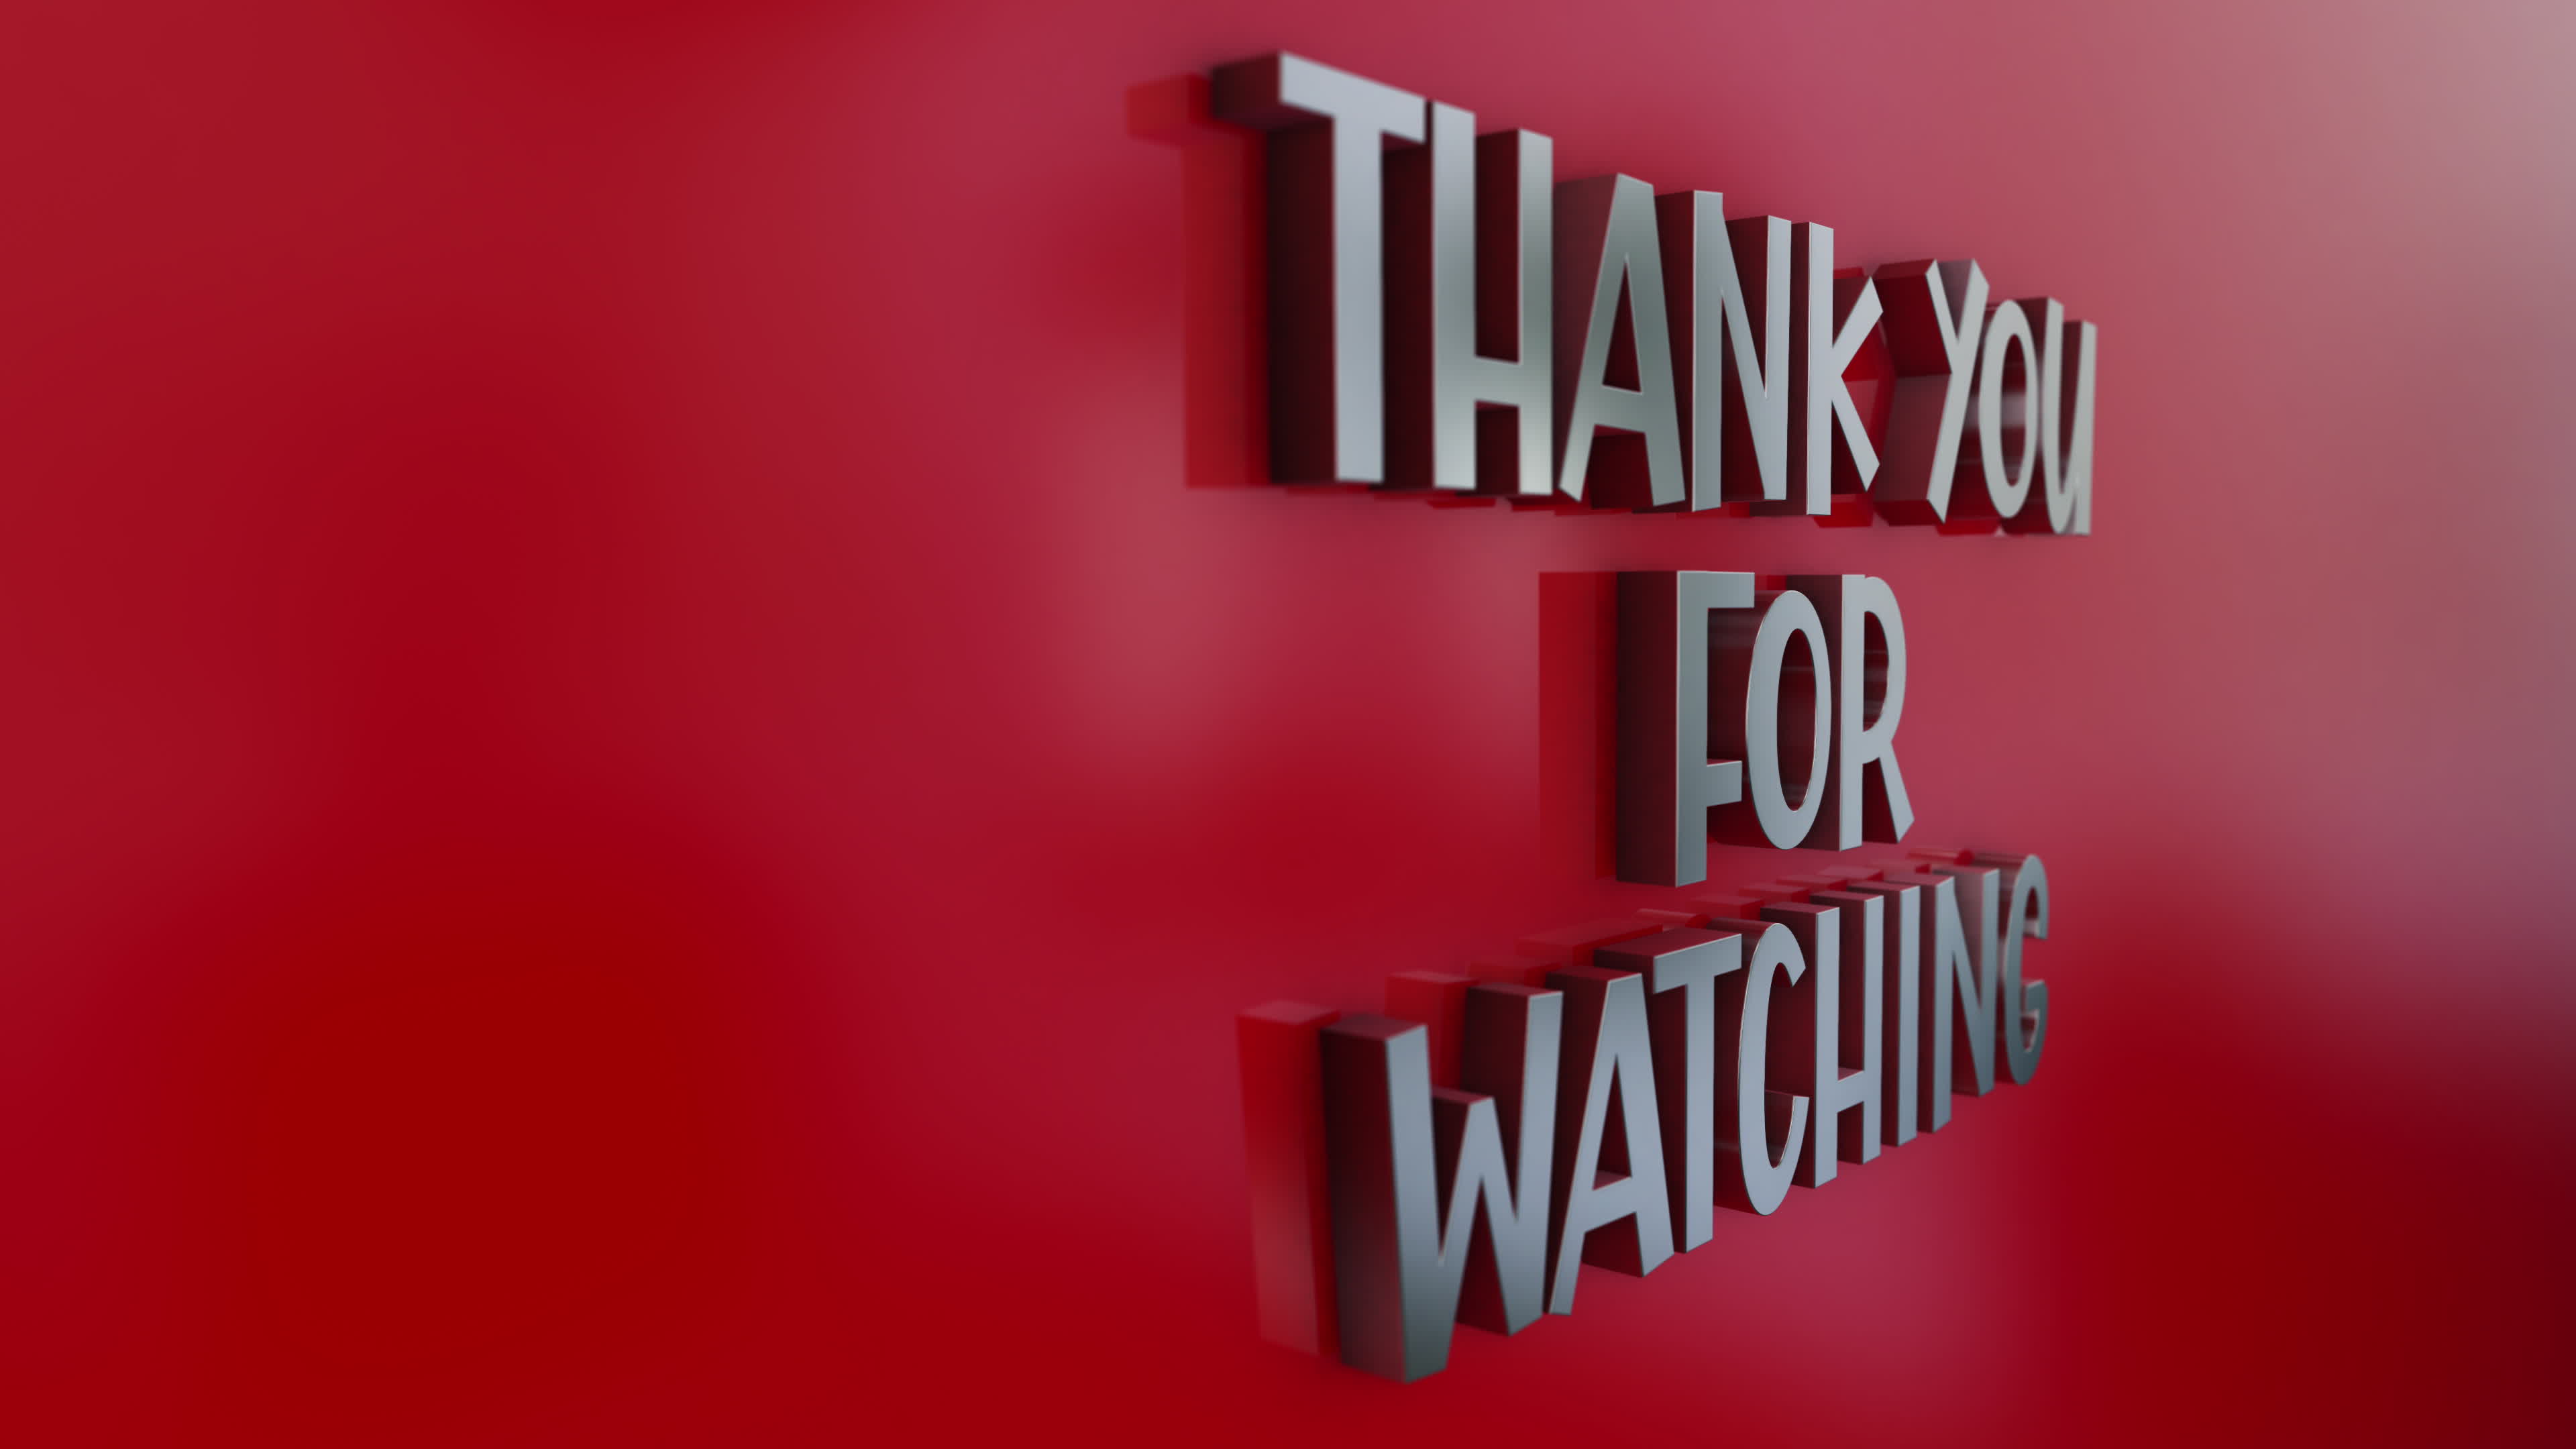 Thank You For Watching Animation Stock Video Footage for Free Download